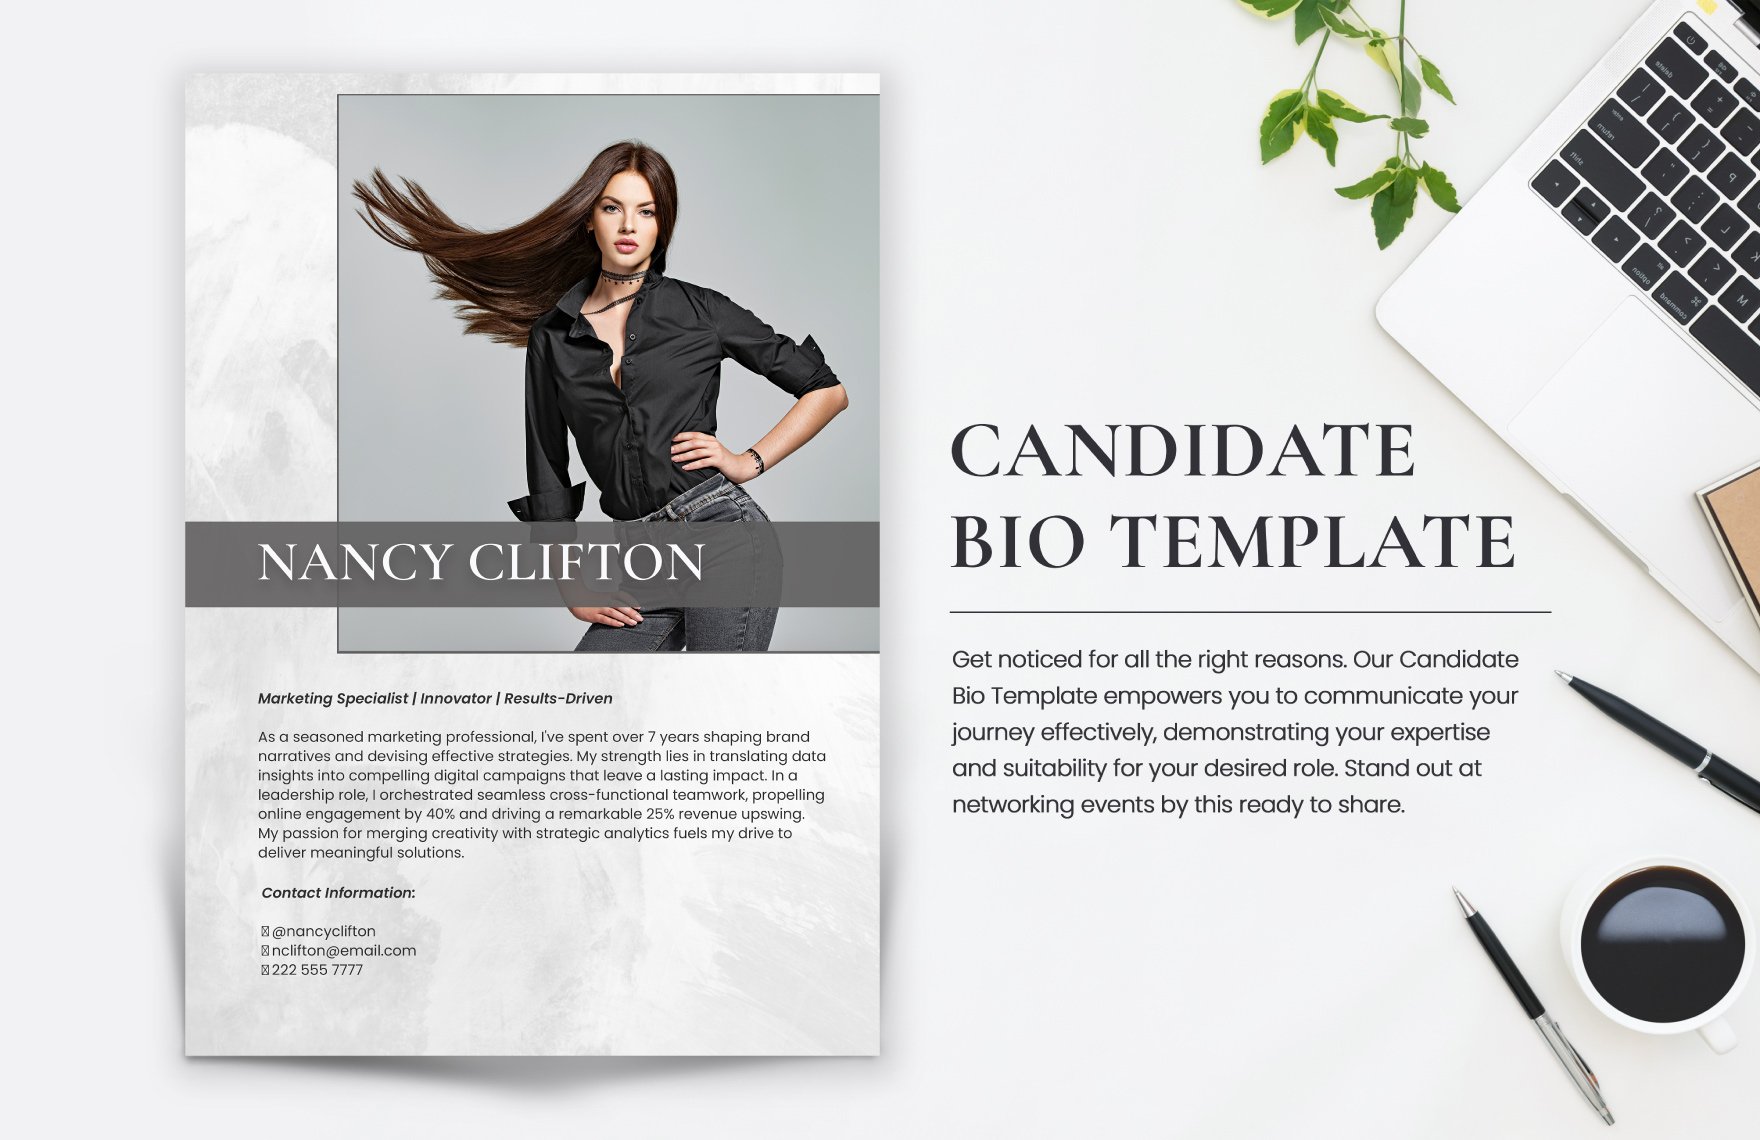 Candidate Bio Template in Word, Illustrator, PSD, PNG